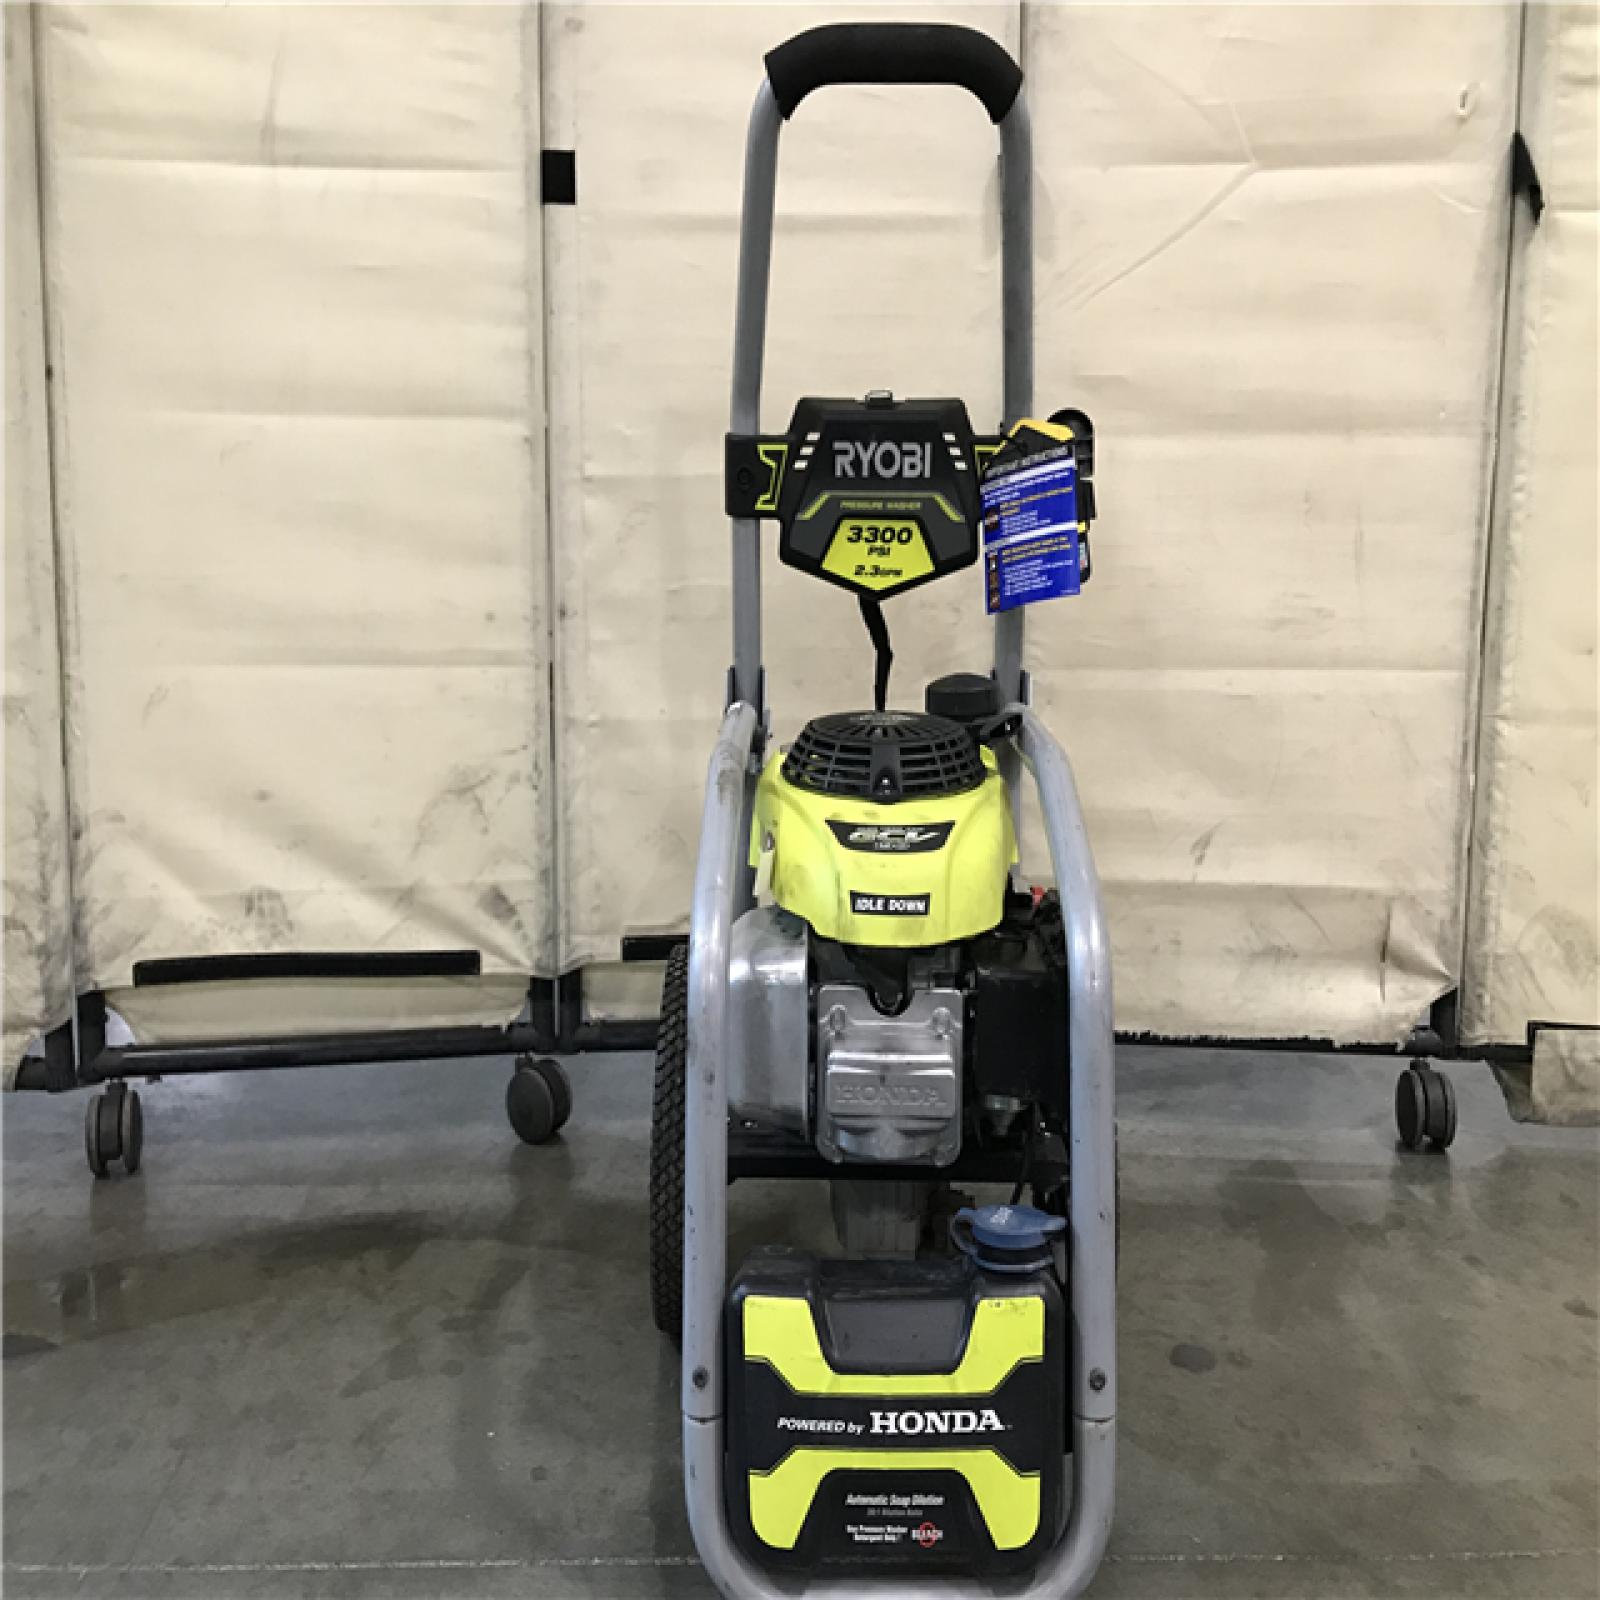 California AS-IS RYOBI 3300 PSI 2.3 GPM Cold Water Gas Pressure Washer with Honda GCV190 Idle Down